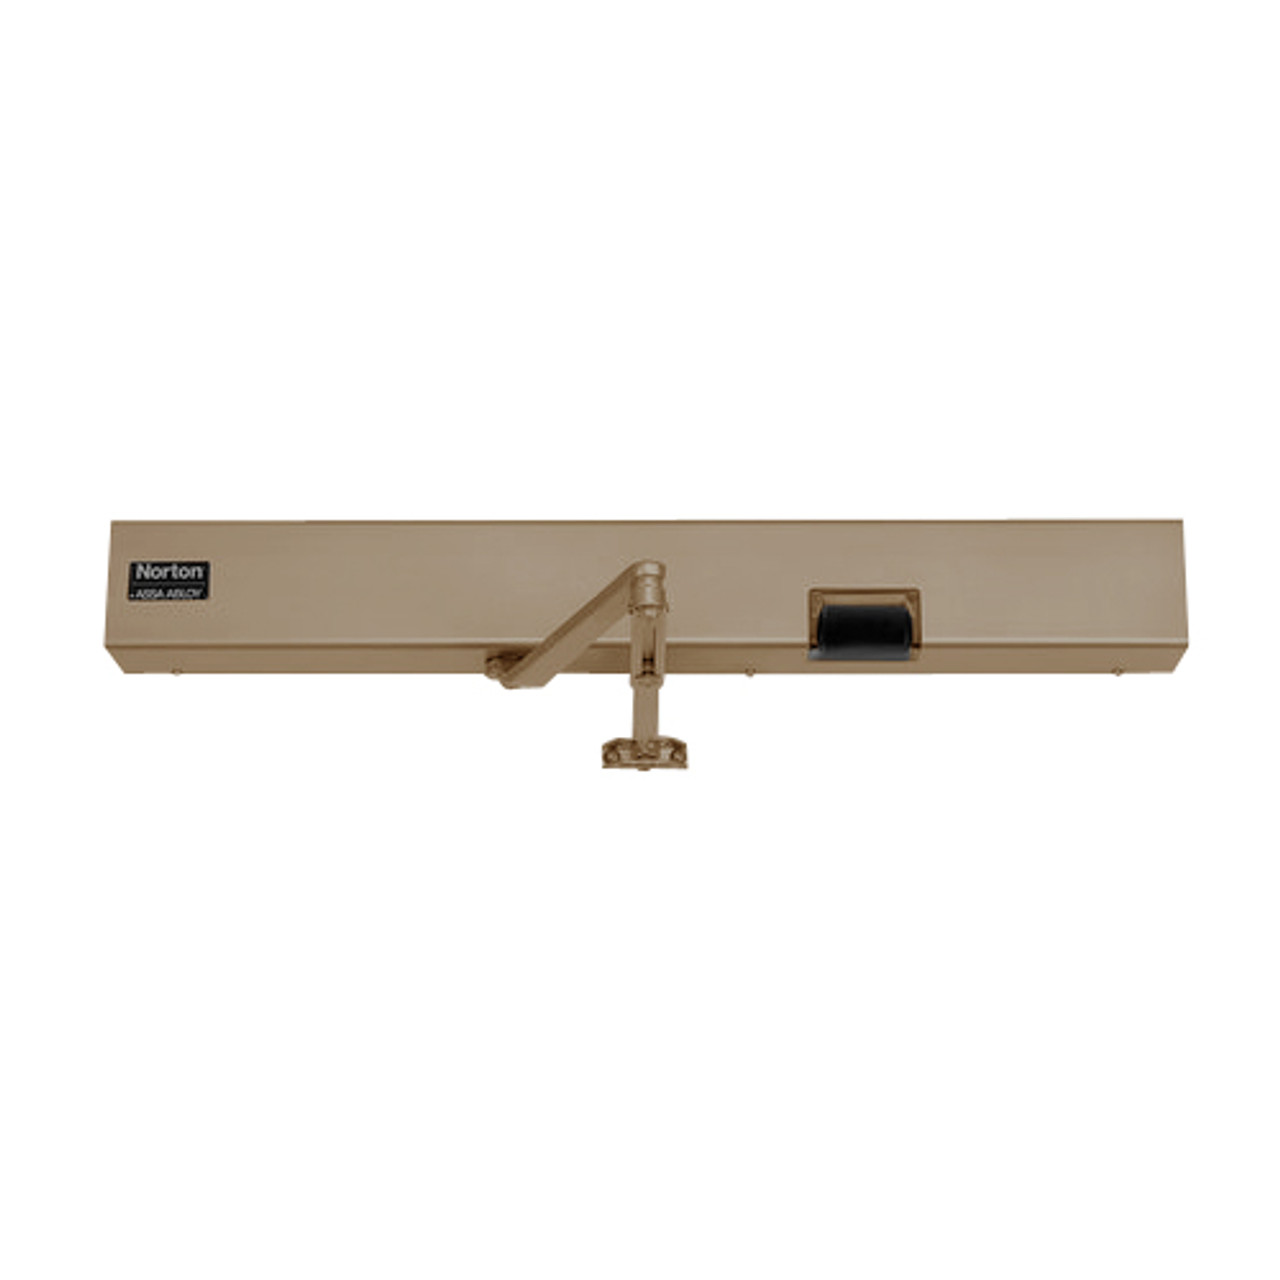 7125SZ-LH-120VAC-691 Norton 7100SZ Series Safe Zone Multi-Point Closer/Holder with Motion Sensor and Push Side Double Lever 11 inch Main Arm in Dull Bronze Finish